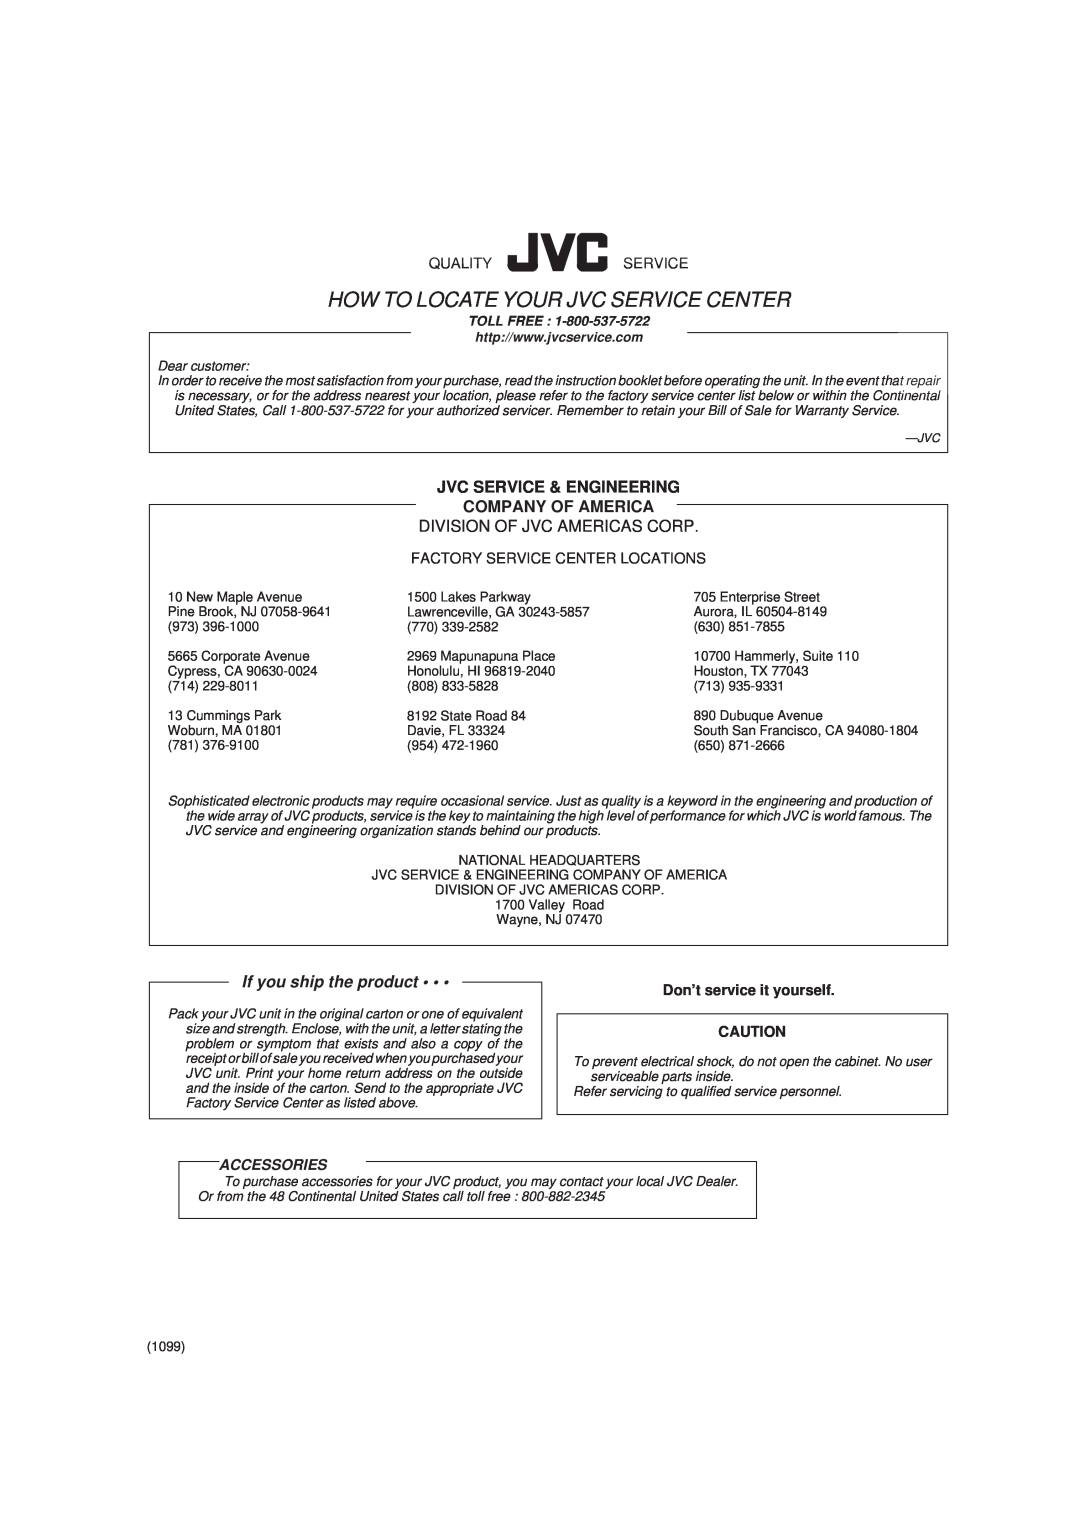 JVC rx-8010vbk manual Jvc Service & Engineering Company Of America, Division Of Jvc Americas Corp, If you ship the product 